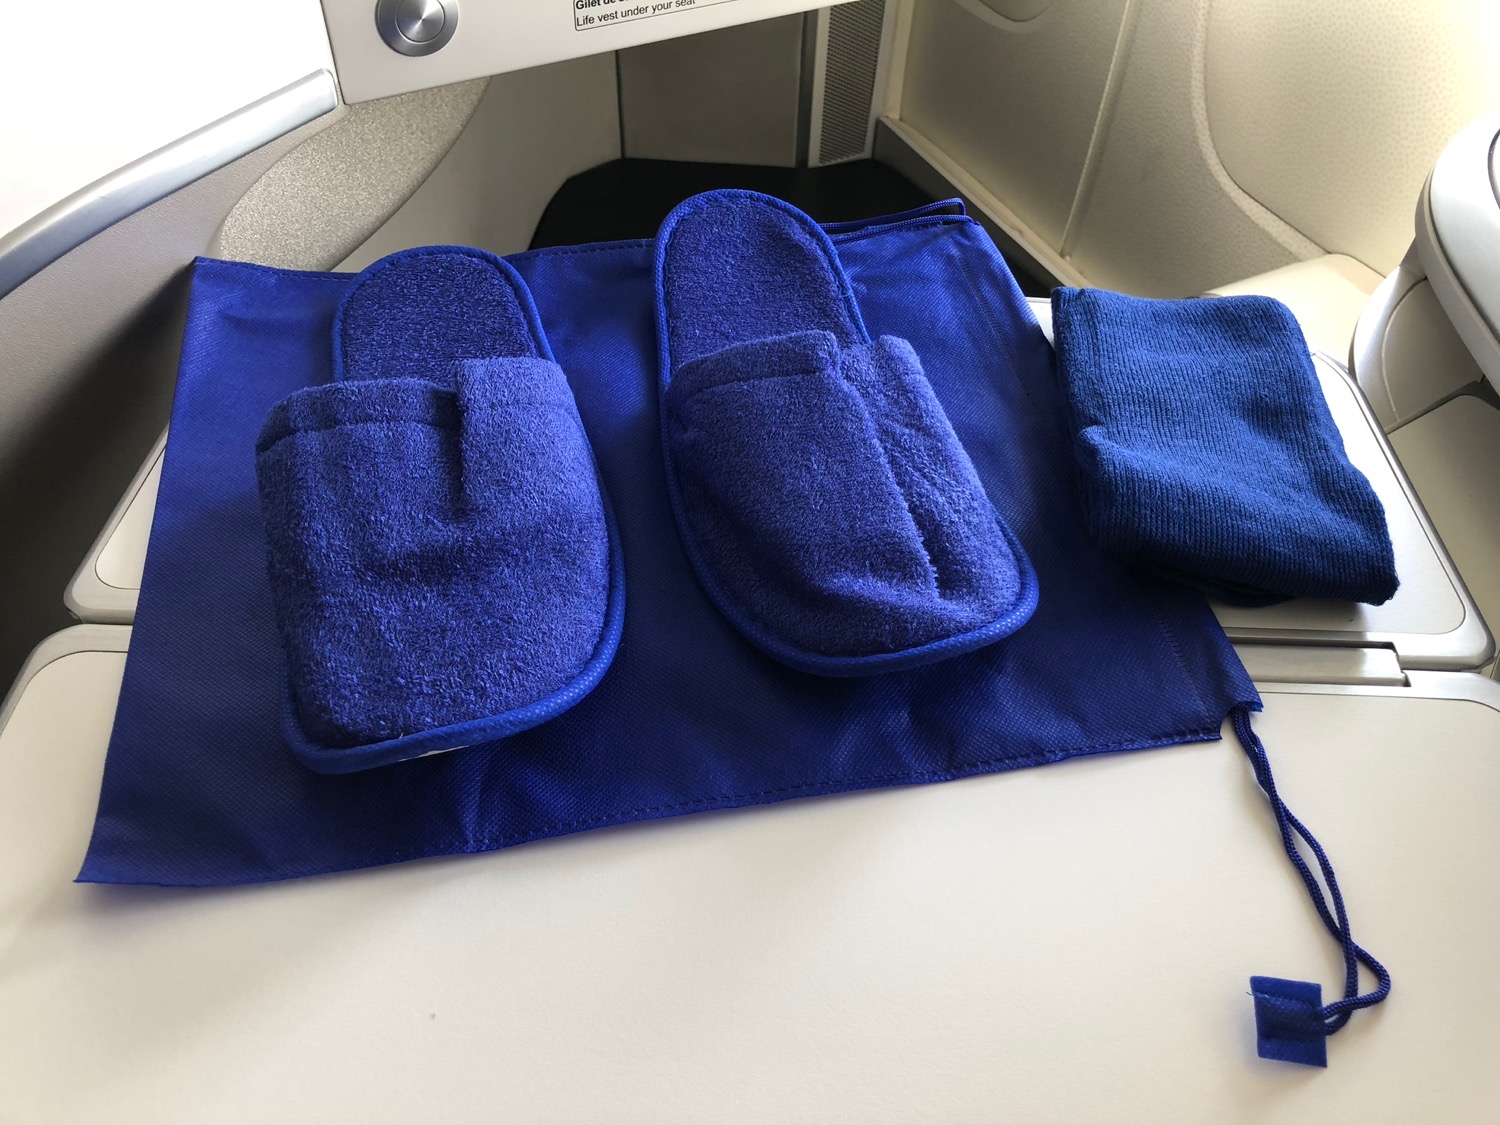 a blue slippers and a towel on a table